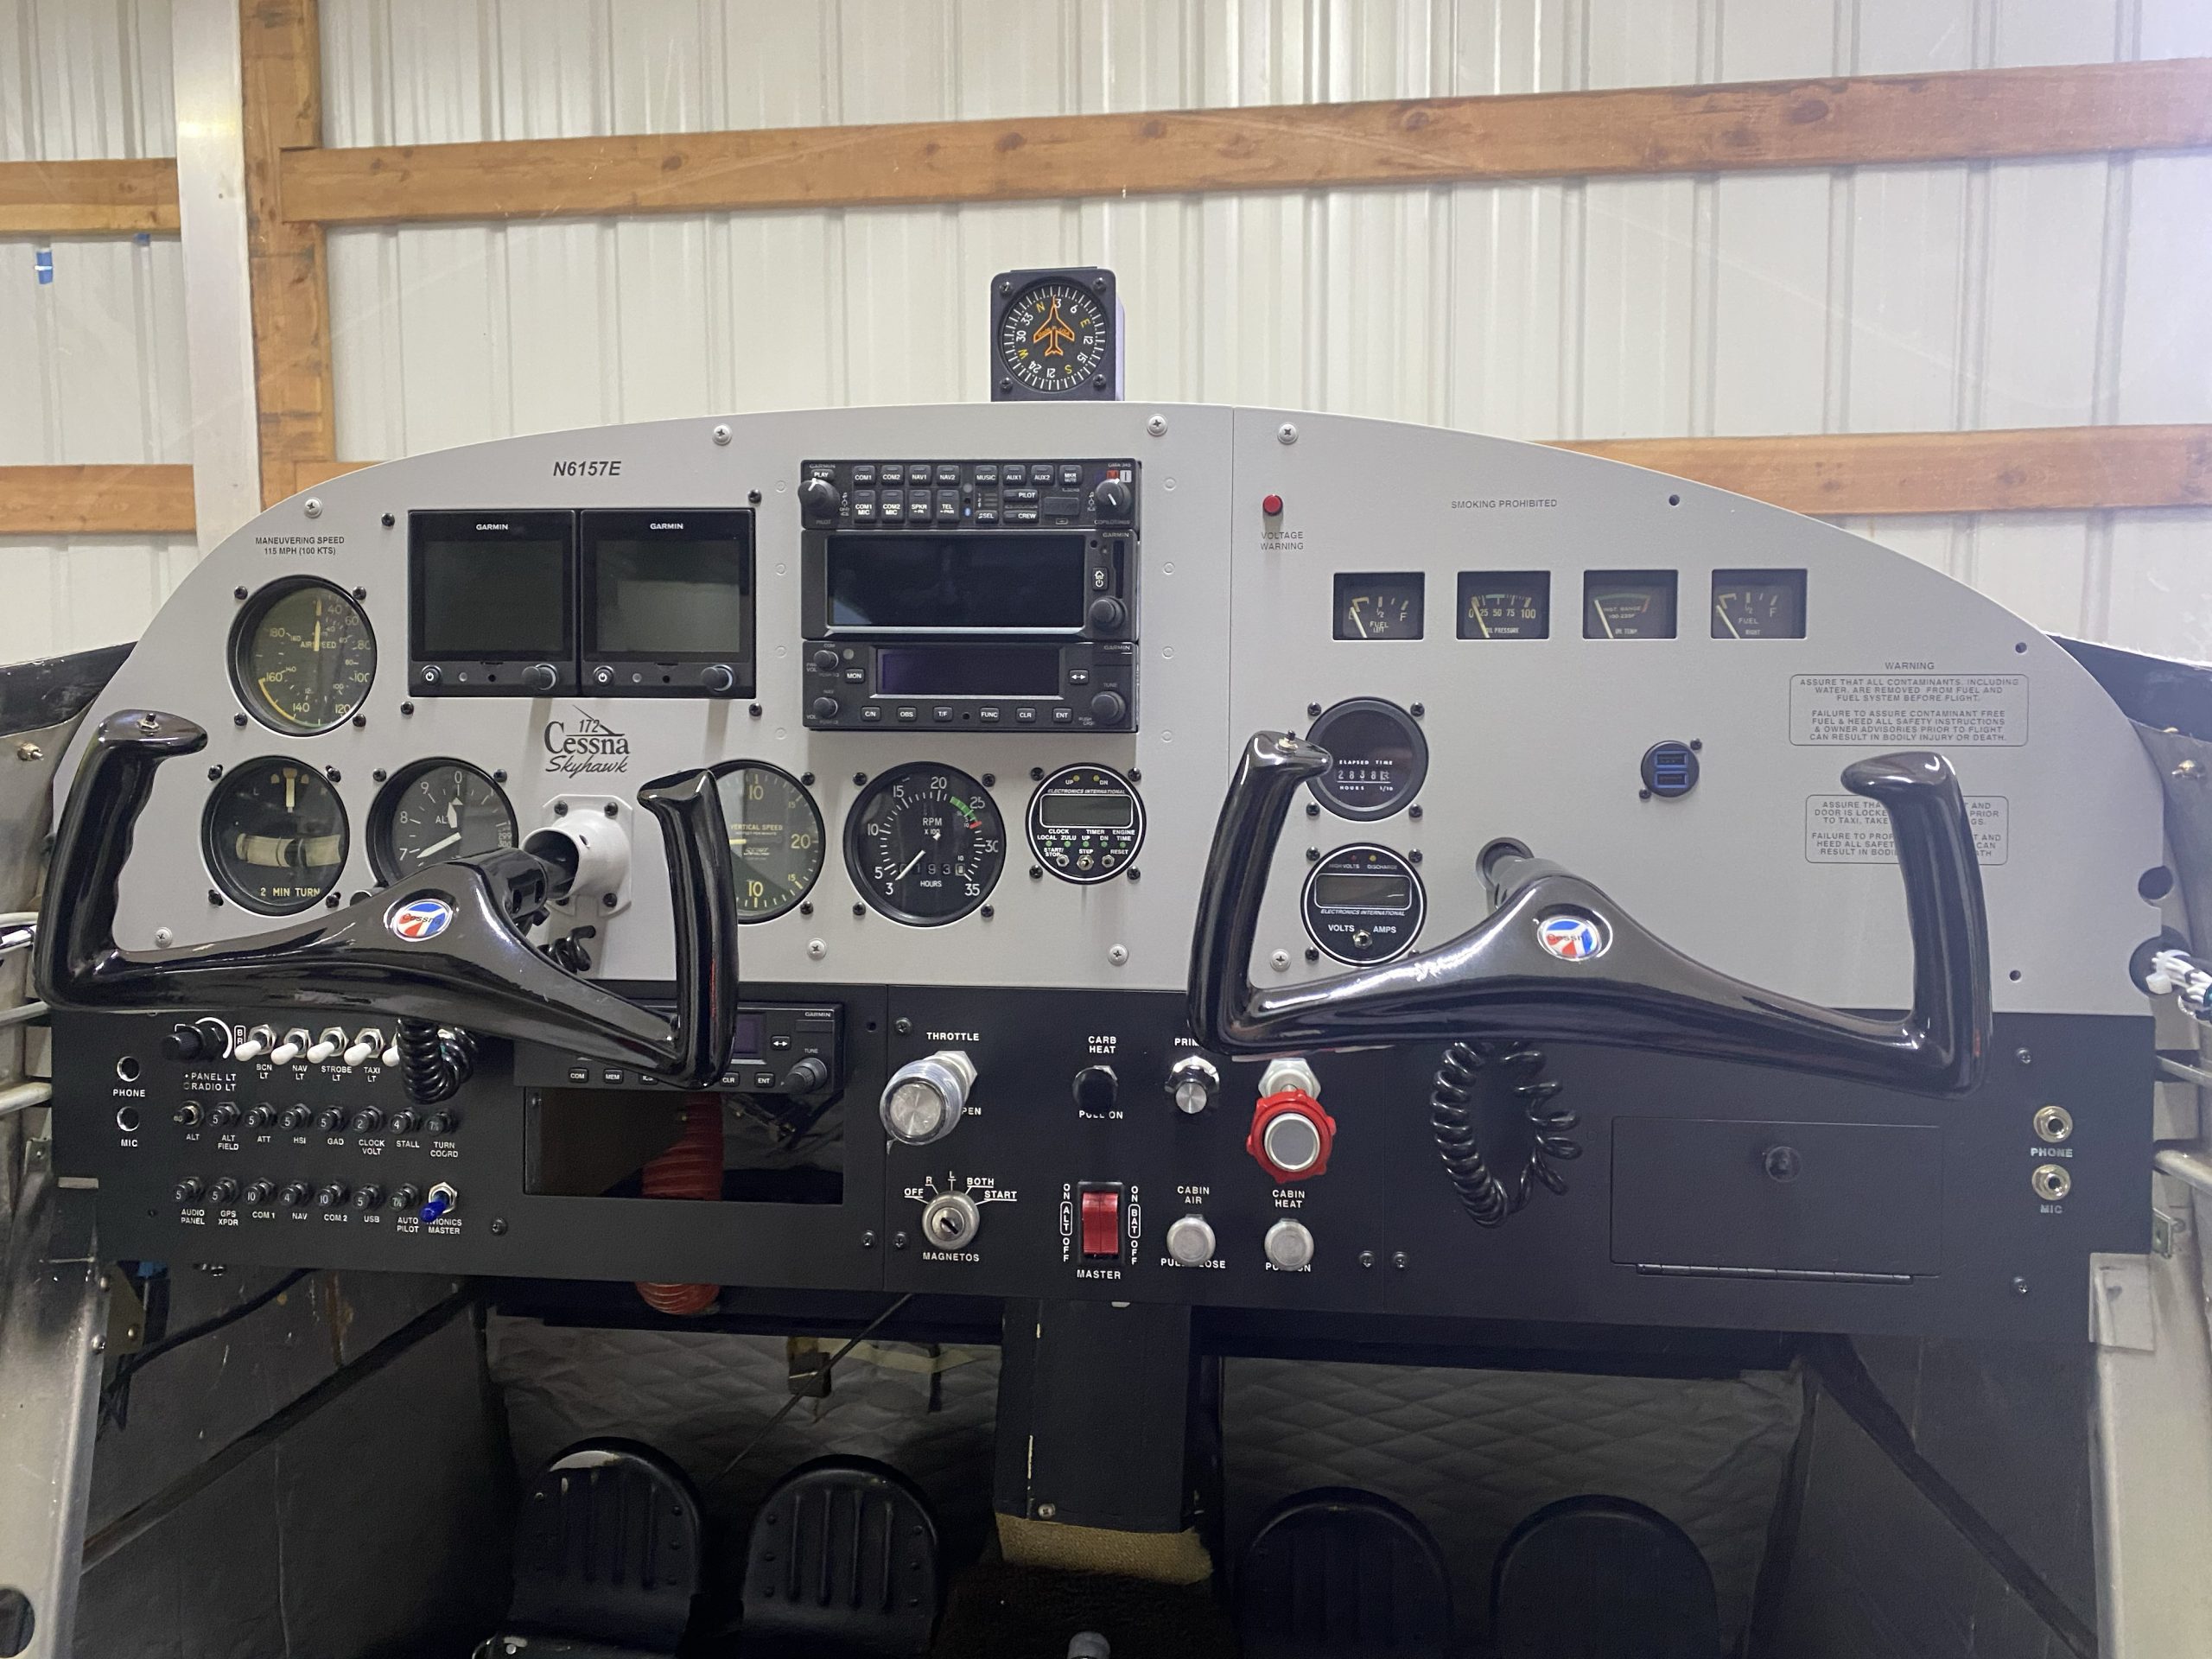 1959 Cessna 172 Instrument Panel with a radio stack and dual G5's